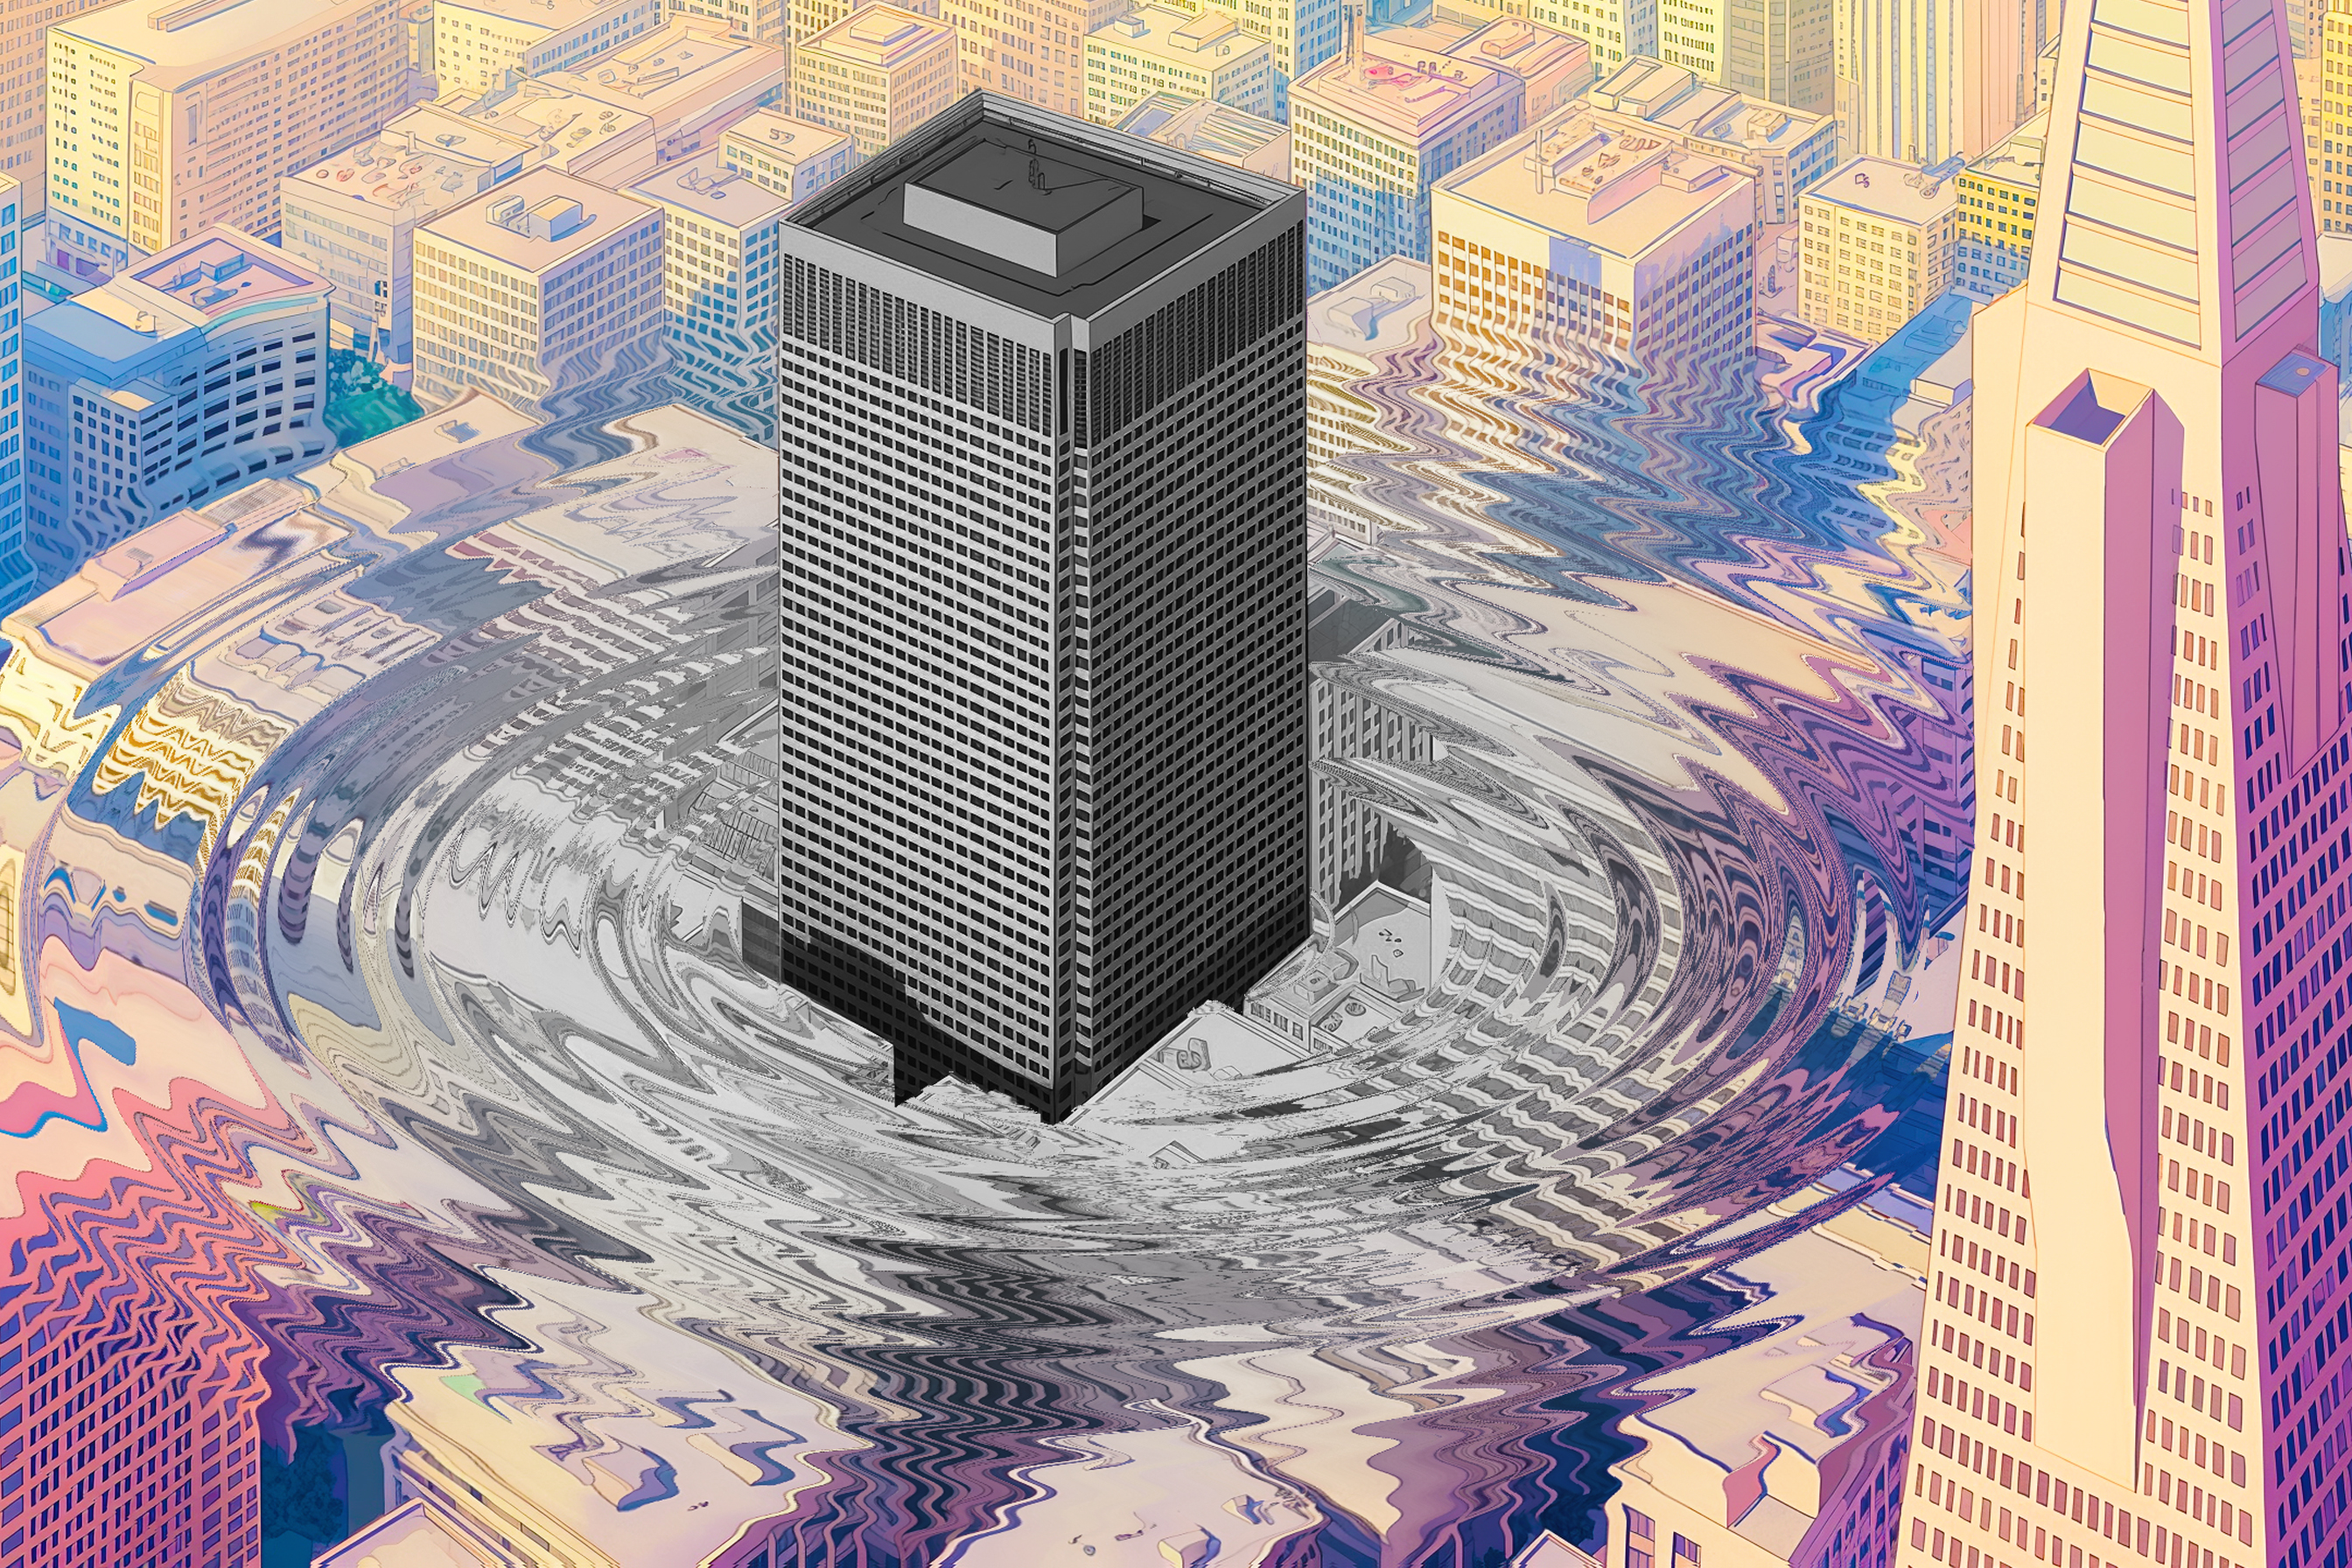 The image shows a black skyscraper set in a cityscape where the surrounding buildings appear to be melting or warping into a vortex-like effect around it.